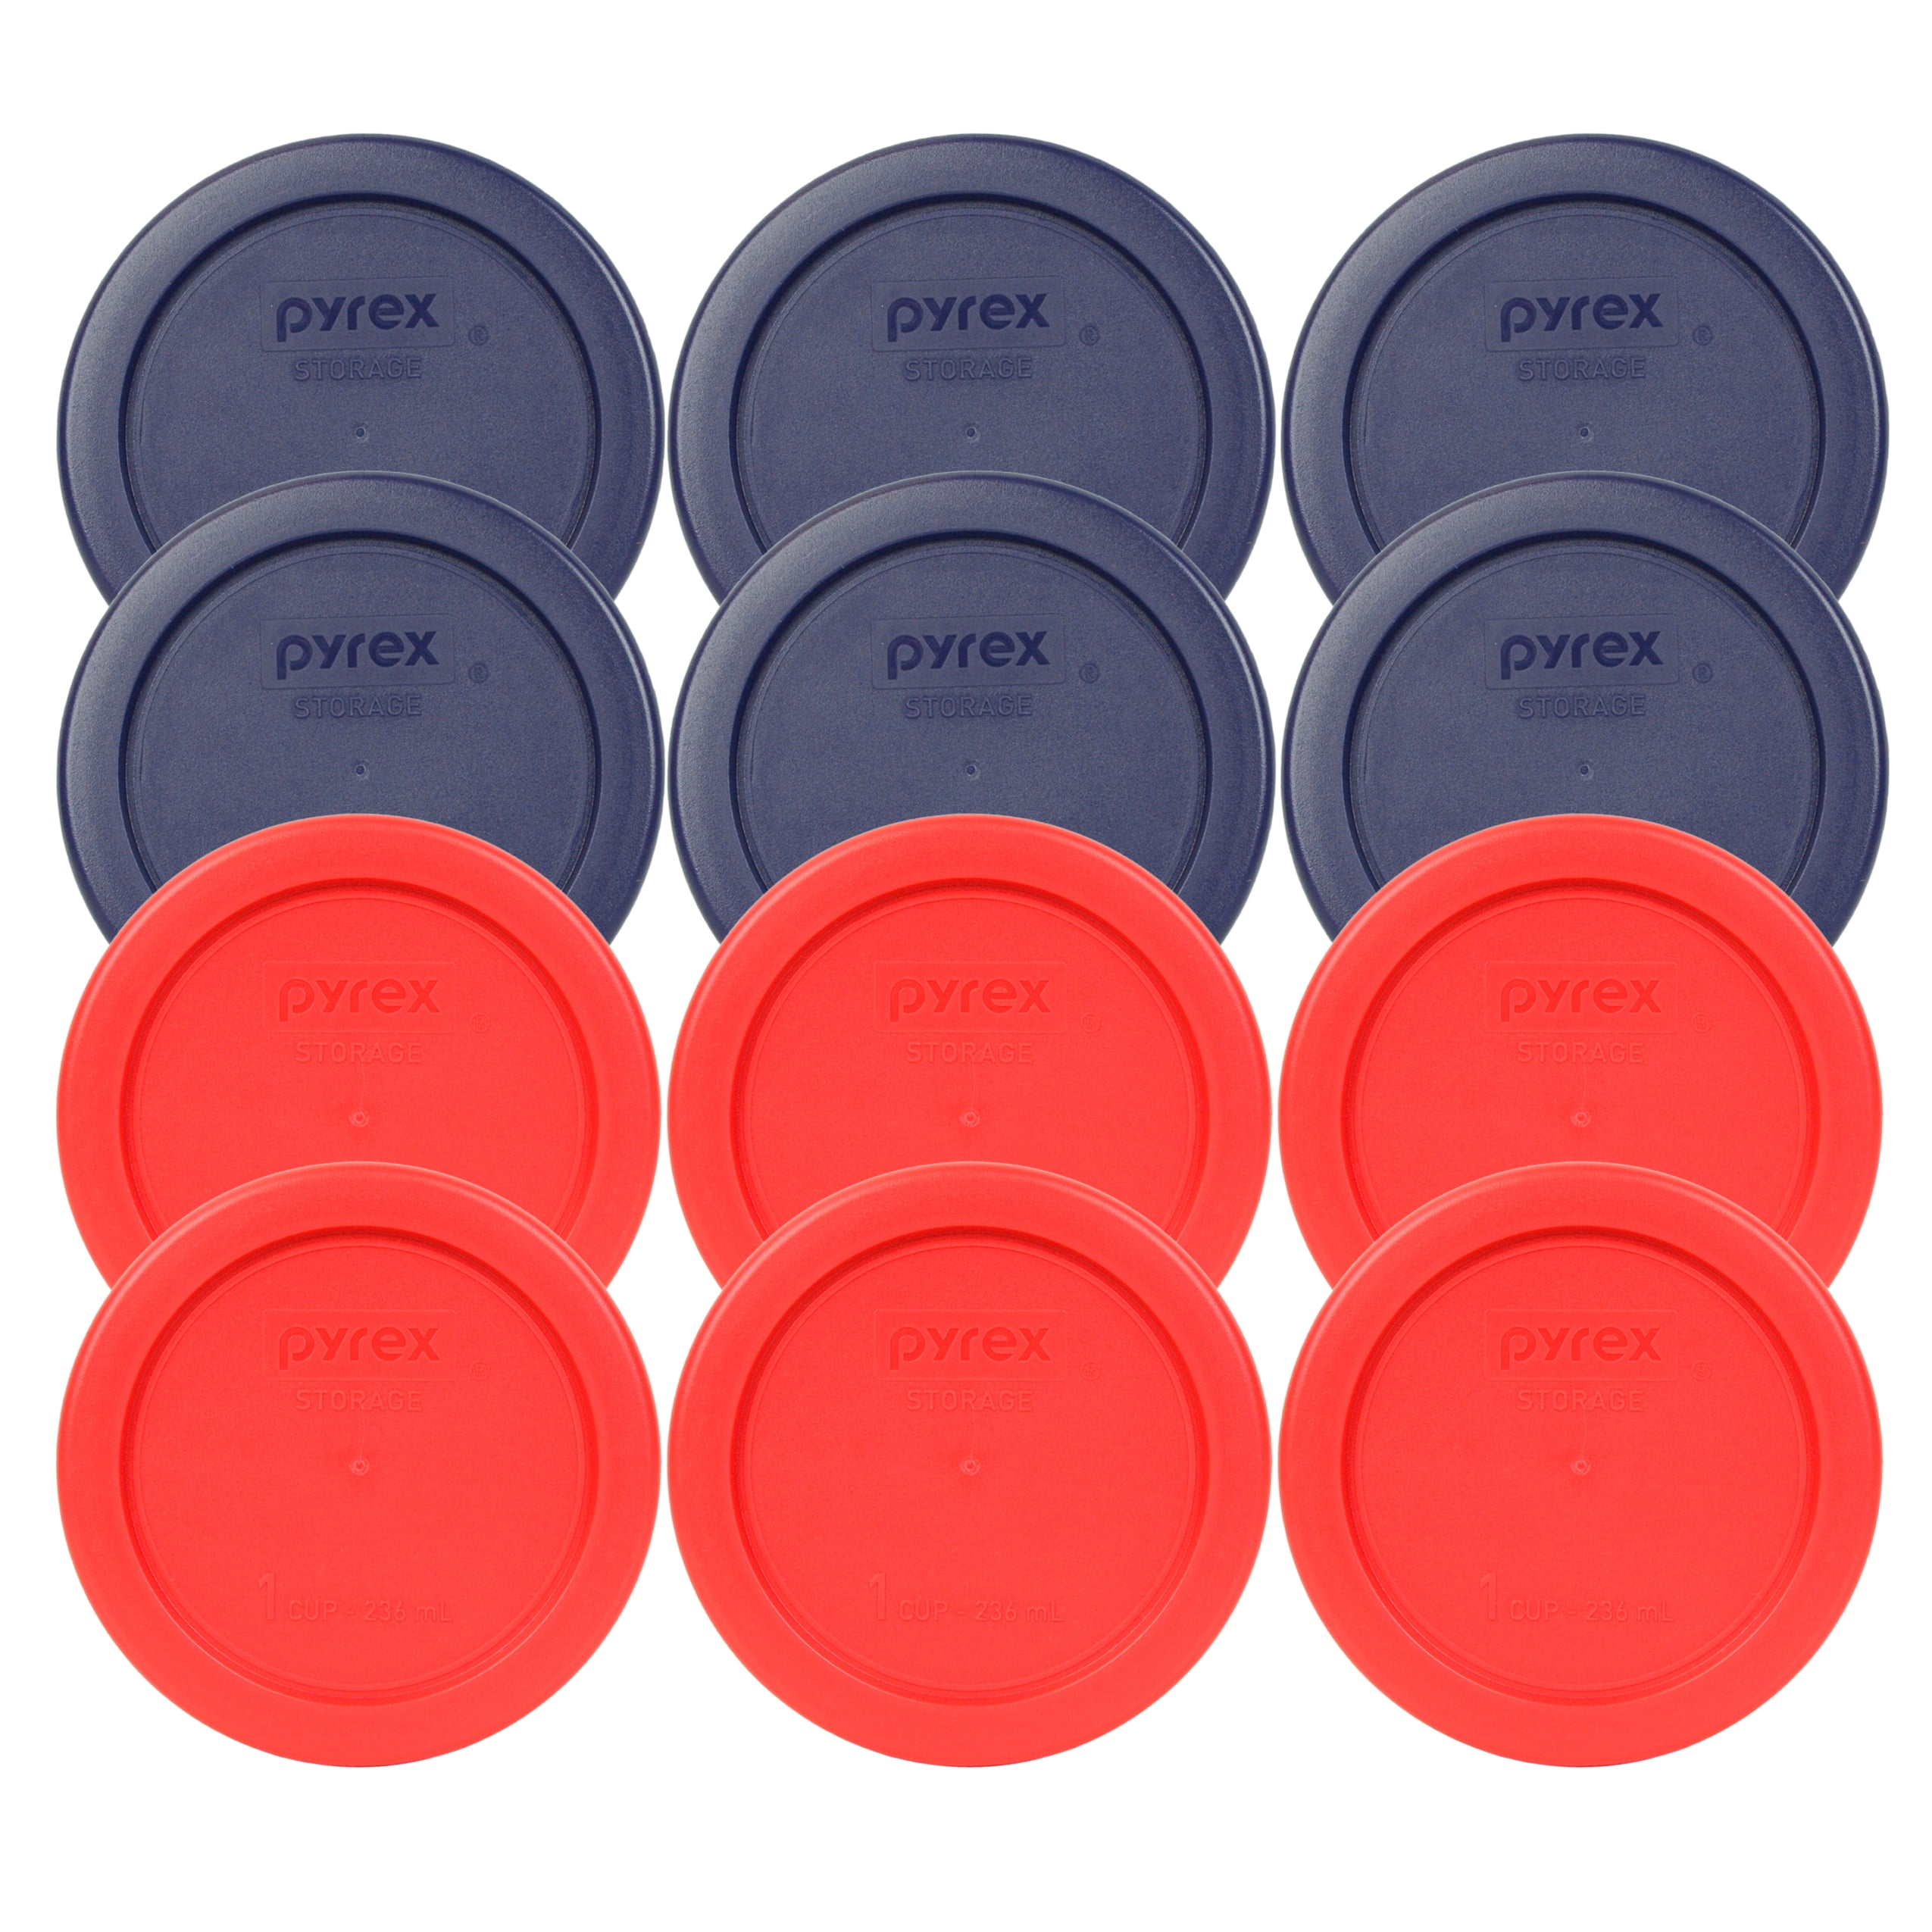 Cadet Blue and 1 Red 1 Pyrex 7202-PC 1 Cup Round Plastic Storage Lids 2PK